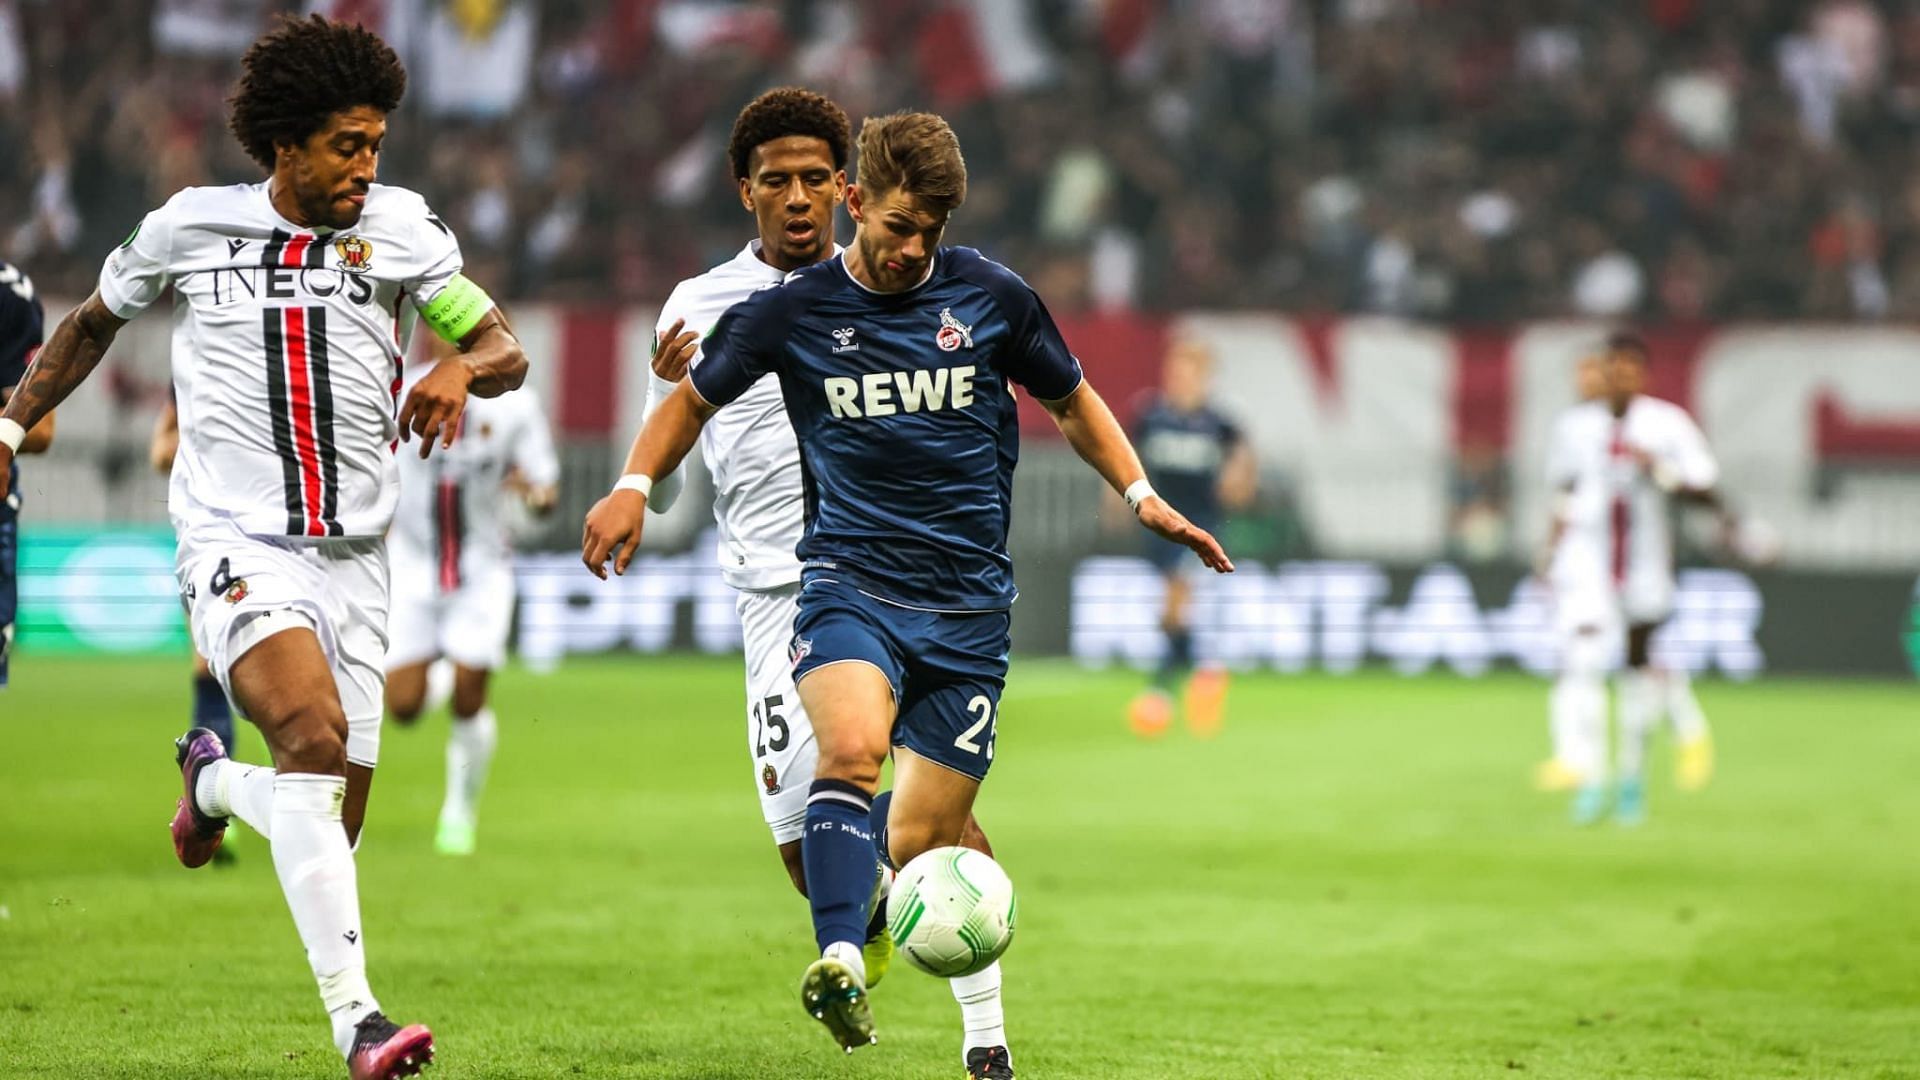 Koln and Nice meet in the decisive Europa Conference League game on Thursday